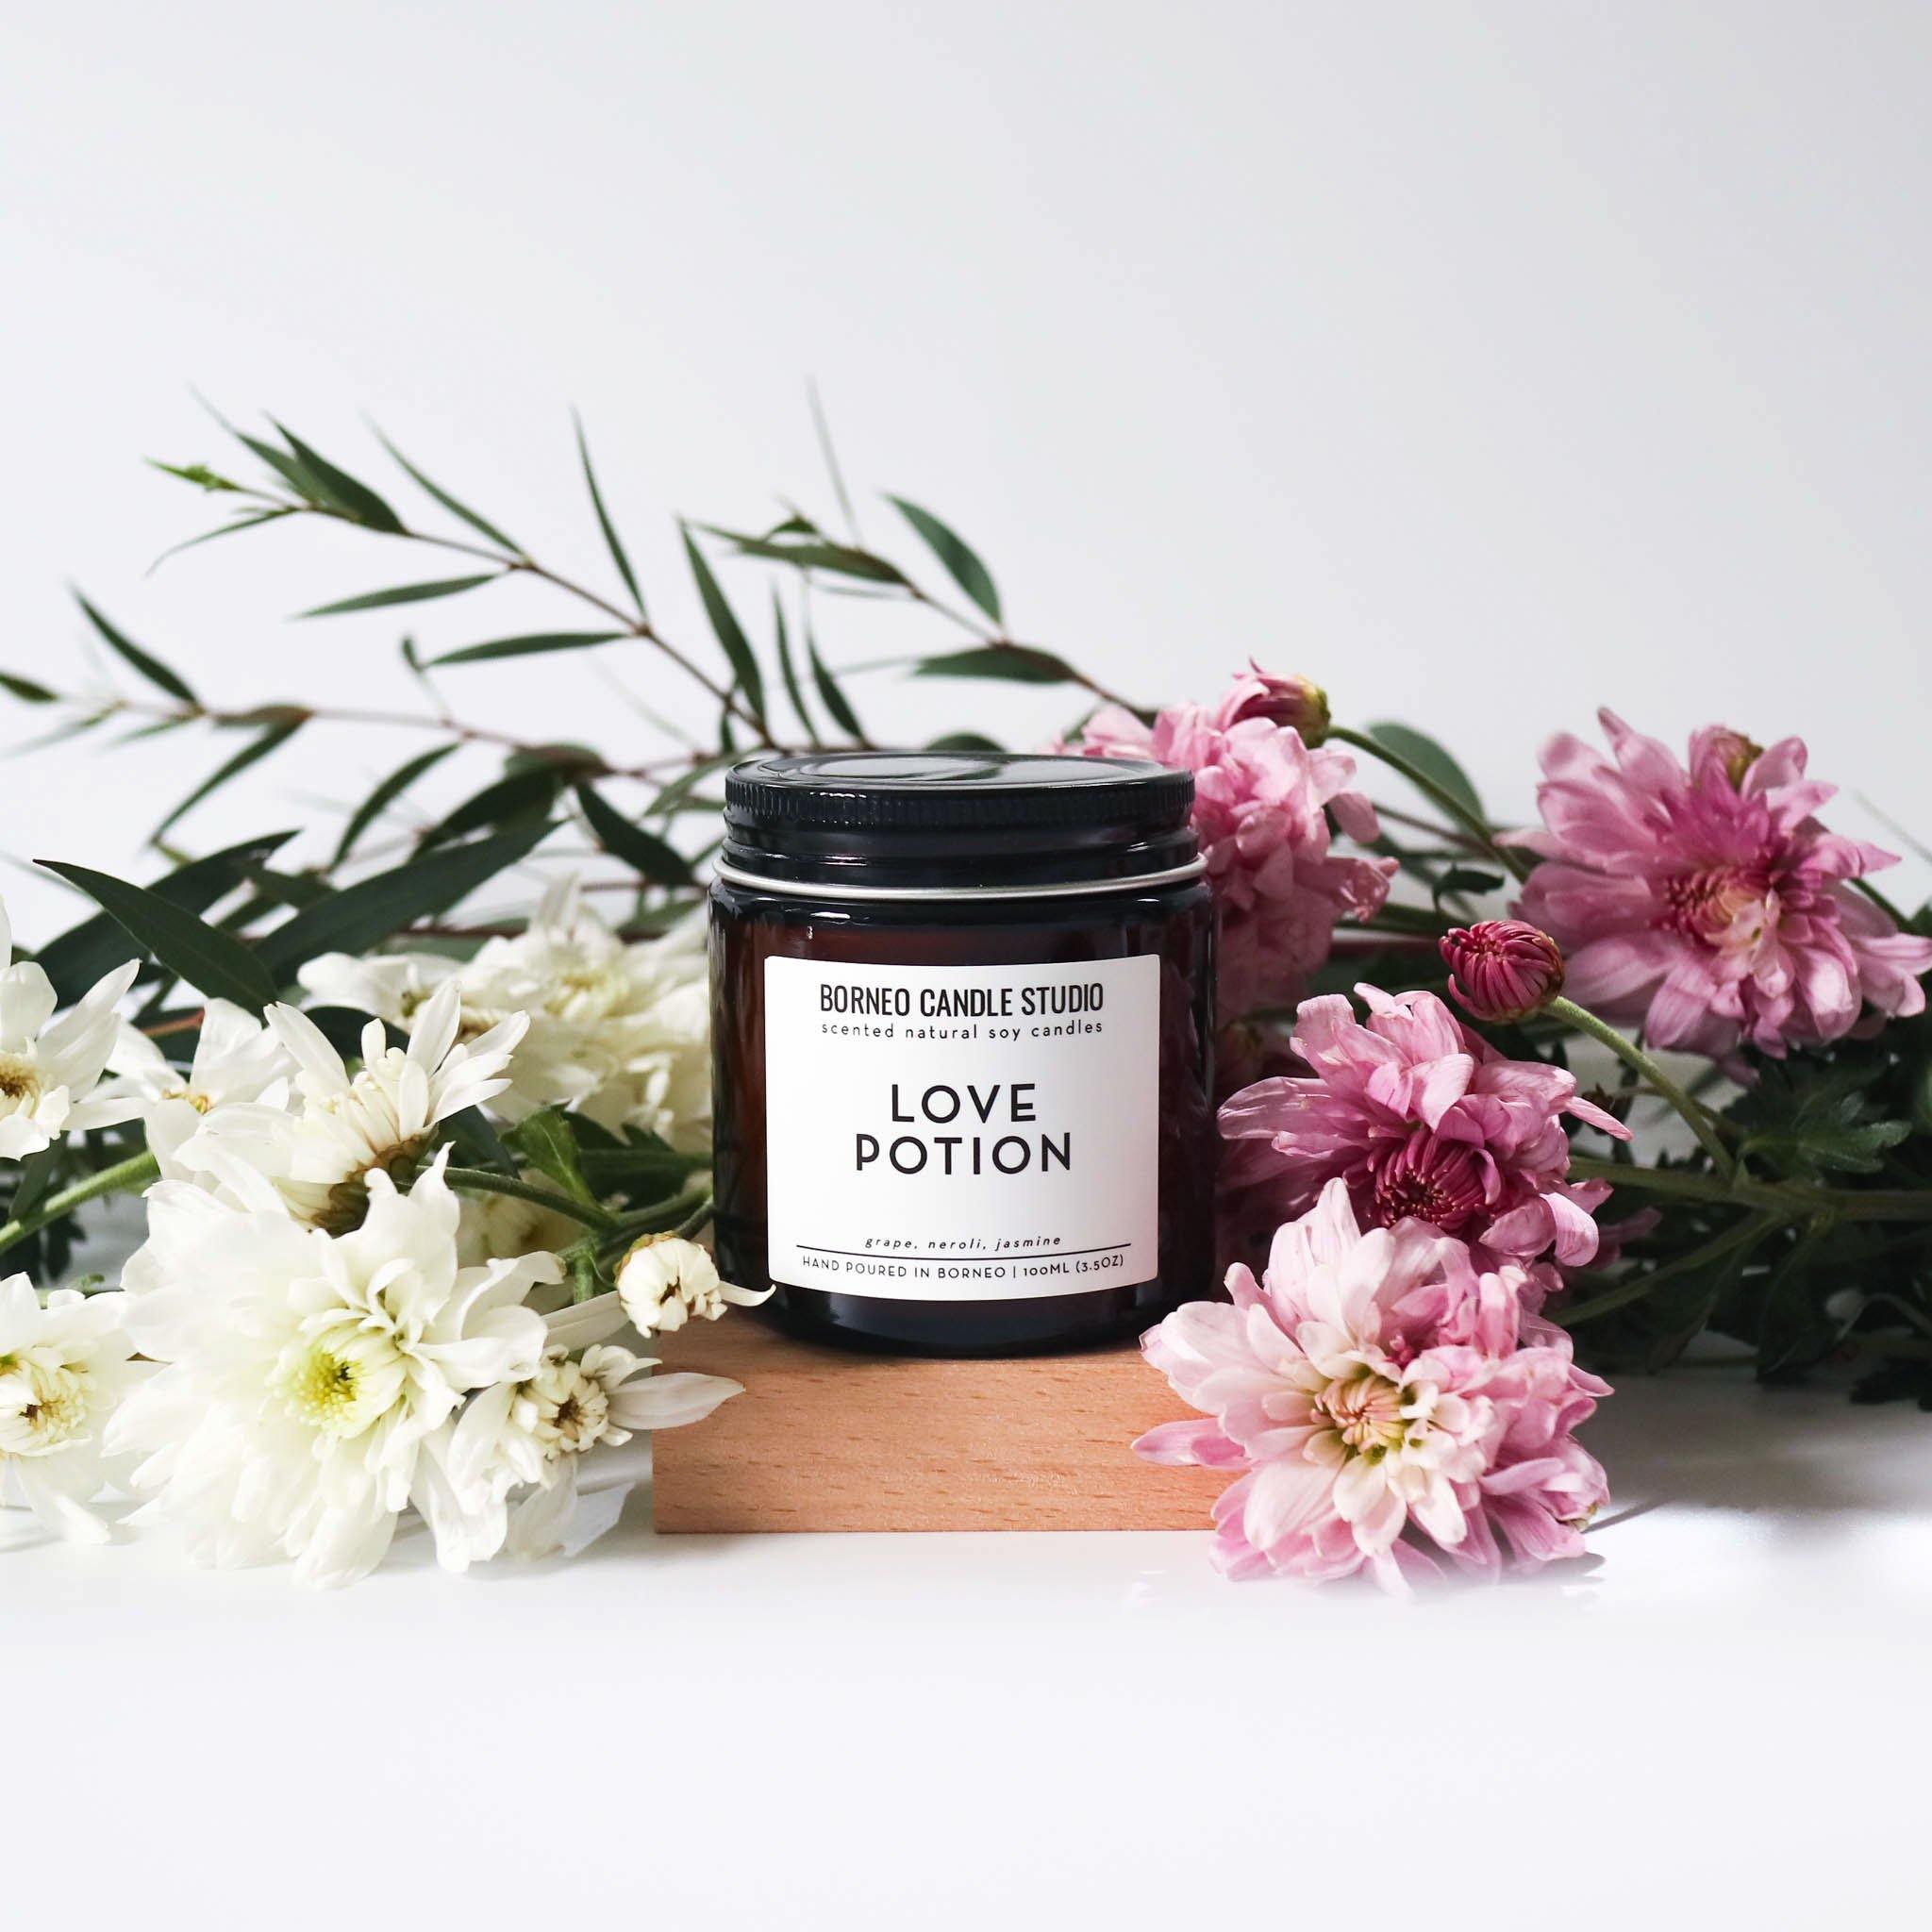 Sweet floral scented candle. Love Potion candle with scent notes of grape, neroli, jasmine 